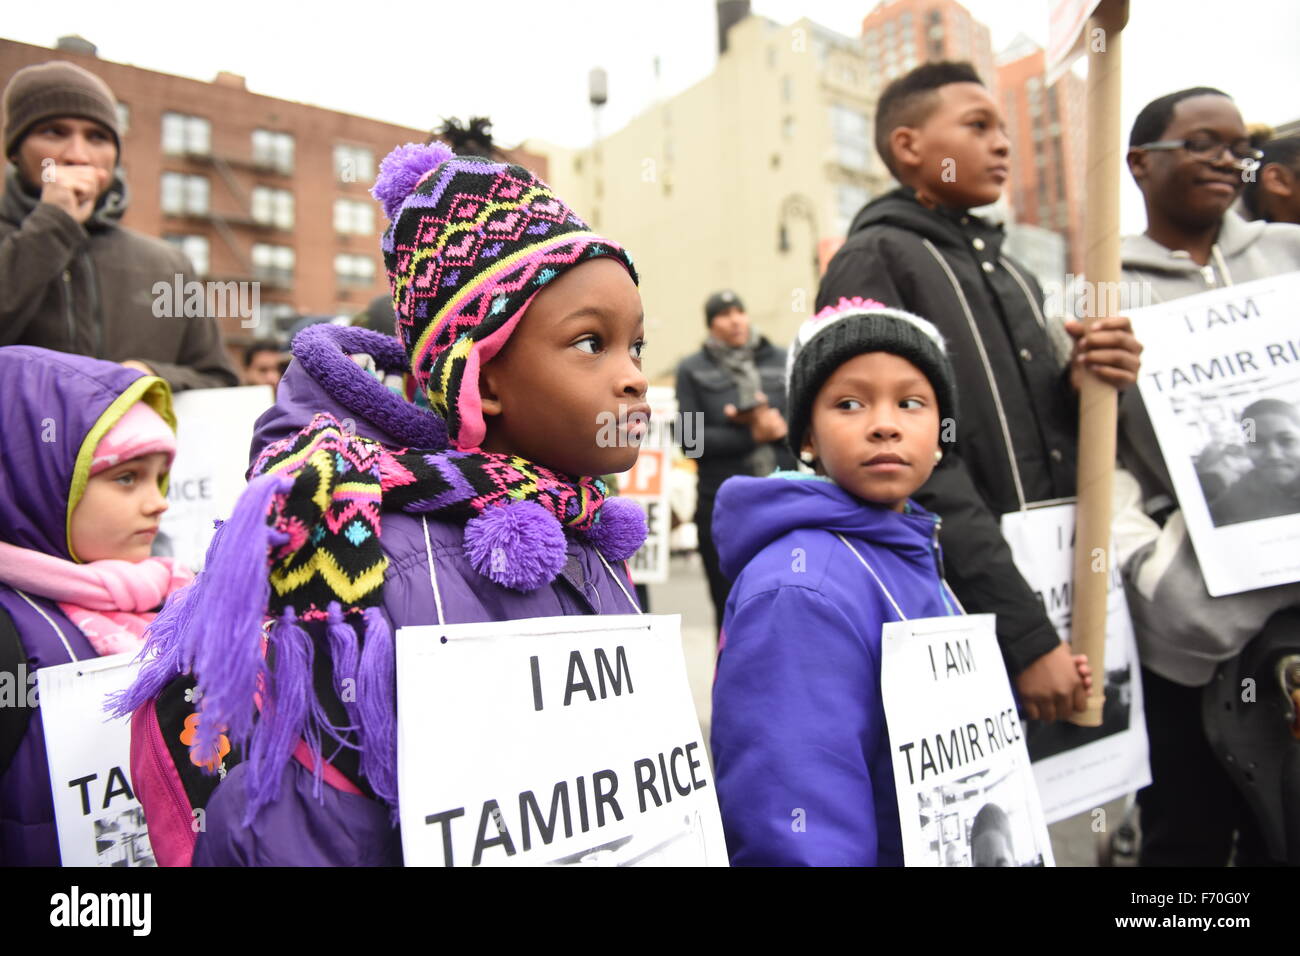 New York City, United States. 22nd Nov, 2015. Kids with Tamir Rice signs. Stop Mass Incarcerations Network sponsored a children's march demanding accountability on the one year anniversary of Tamir Rice's death at the hands of the Cleveland police. © Andy Katz/Pacific Press/Alamy Live News Stock Photo